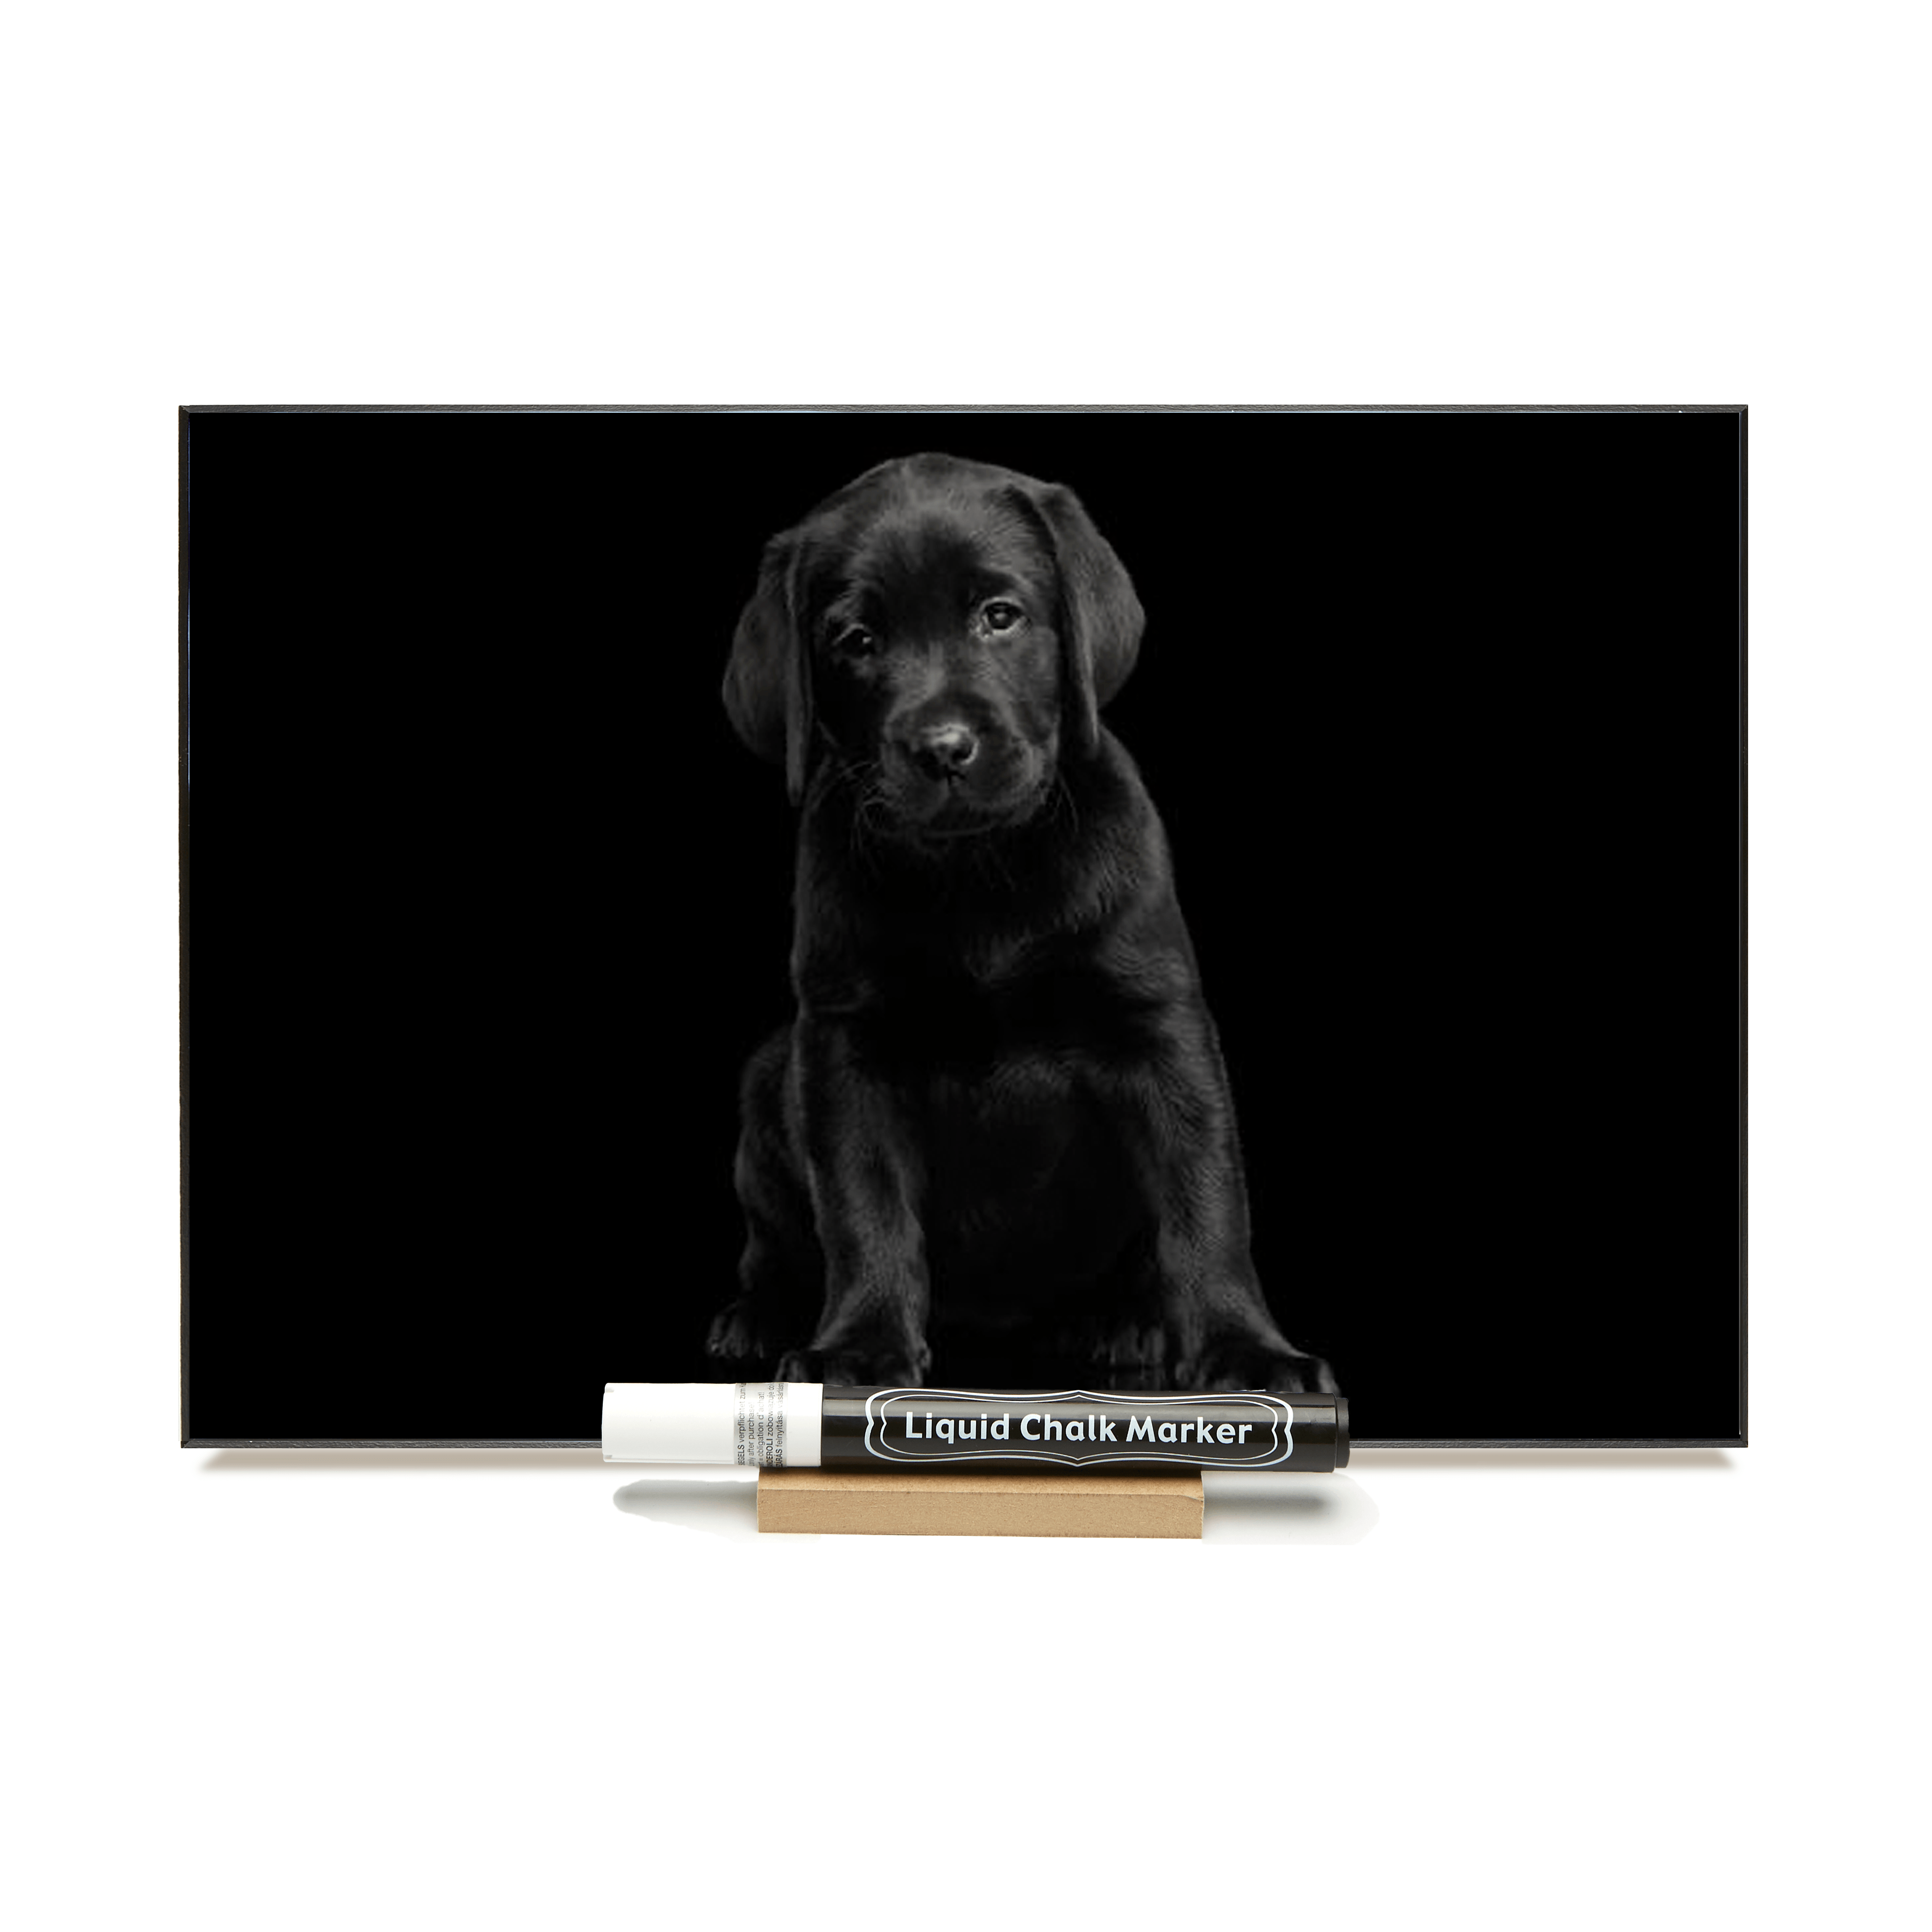 "Black Lab Pup" PHOTO CHALKBOARD Includes Chalkboard, Chalk Marker and Stand